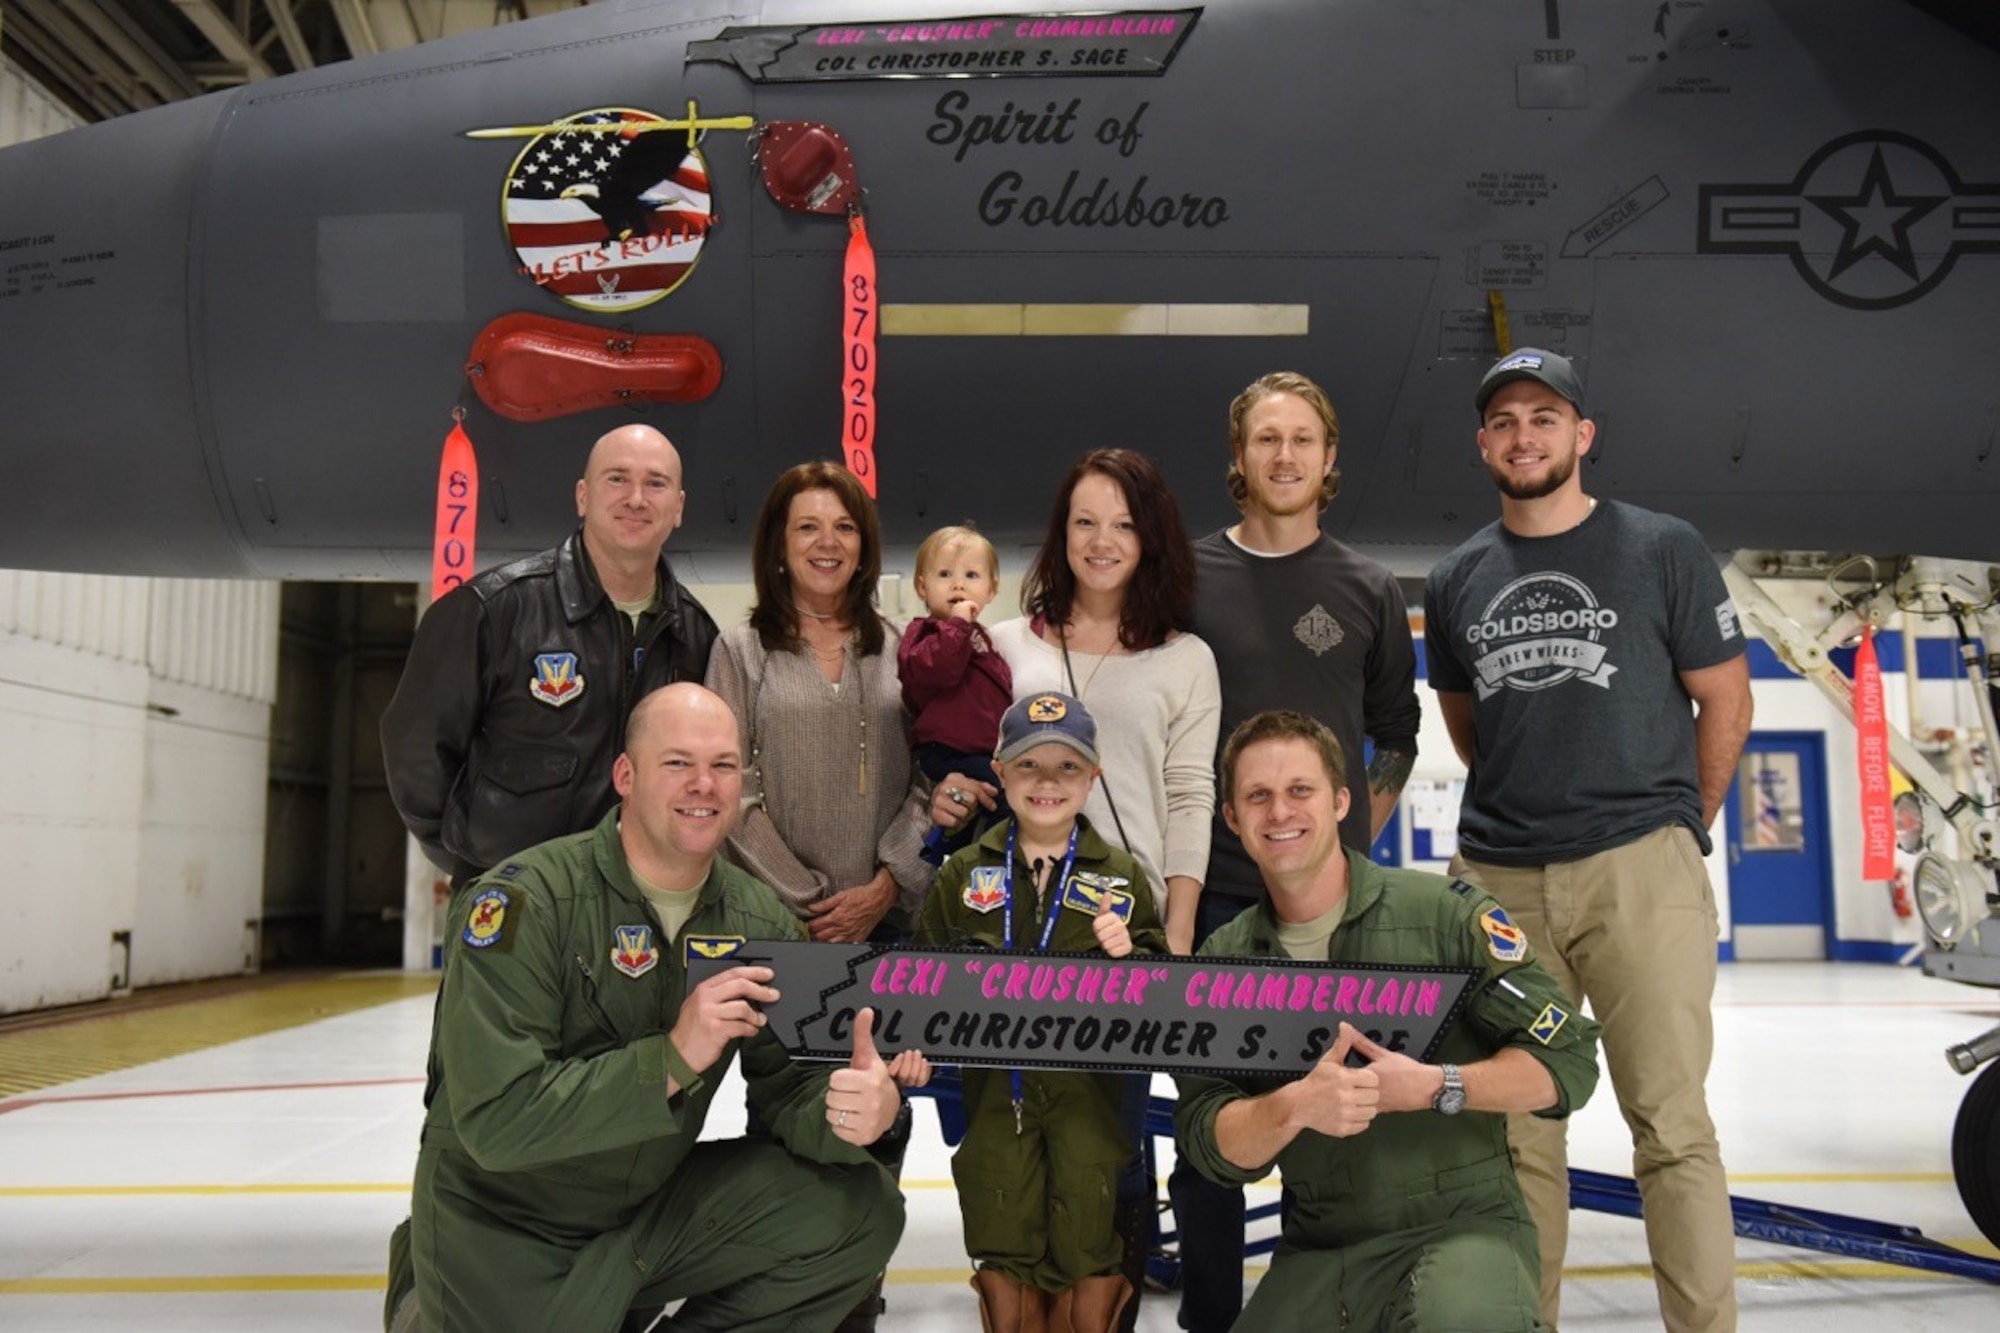 Alexis “Crusher” Chamberlain, seven-year-old leukemia patient, was chosen to spend a day as an honorary fighter pilot with the 334th Fighter Squadron, Feb. 15, 2017, at Seymour Johnson Air Force Base, North Carolina. “Crusher” said this was the first time she saw an F-15E Strike Eagle aircraft in person, but that her favorite part of the visit was the 334th FS coins she received. (U.S. Air Force photo by Airman Miranda A. Loera)